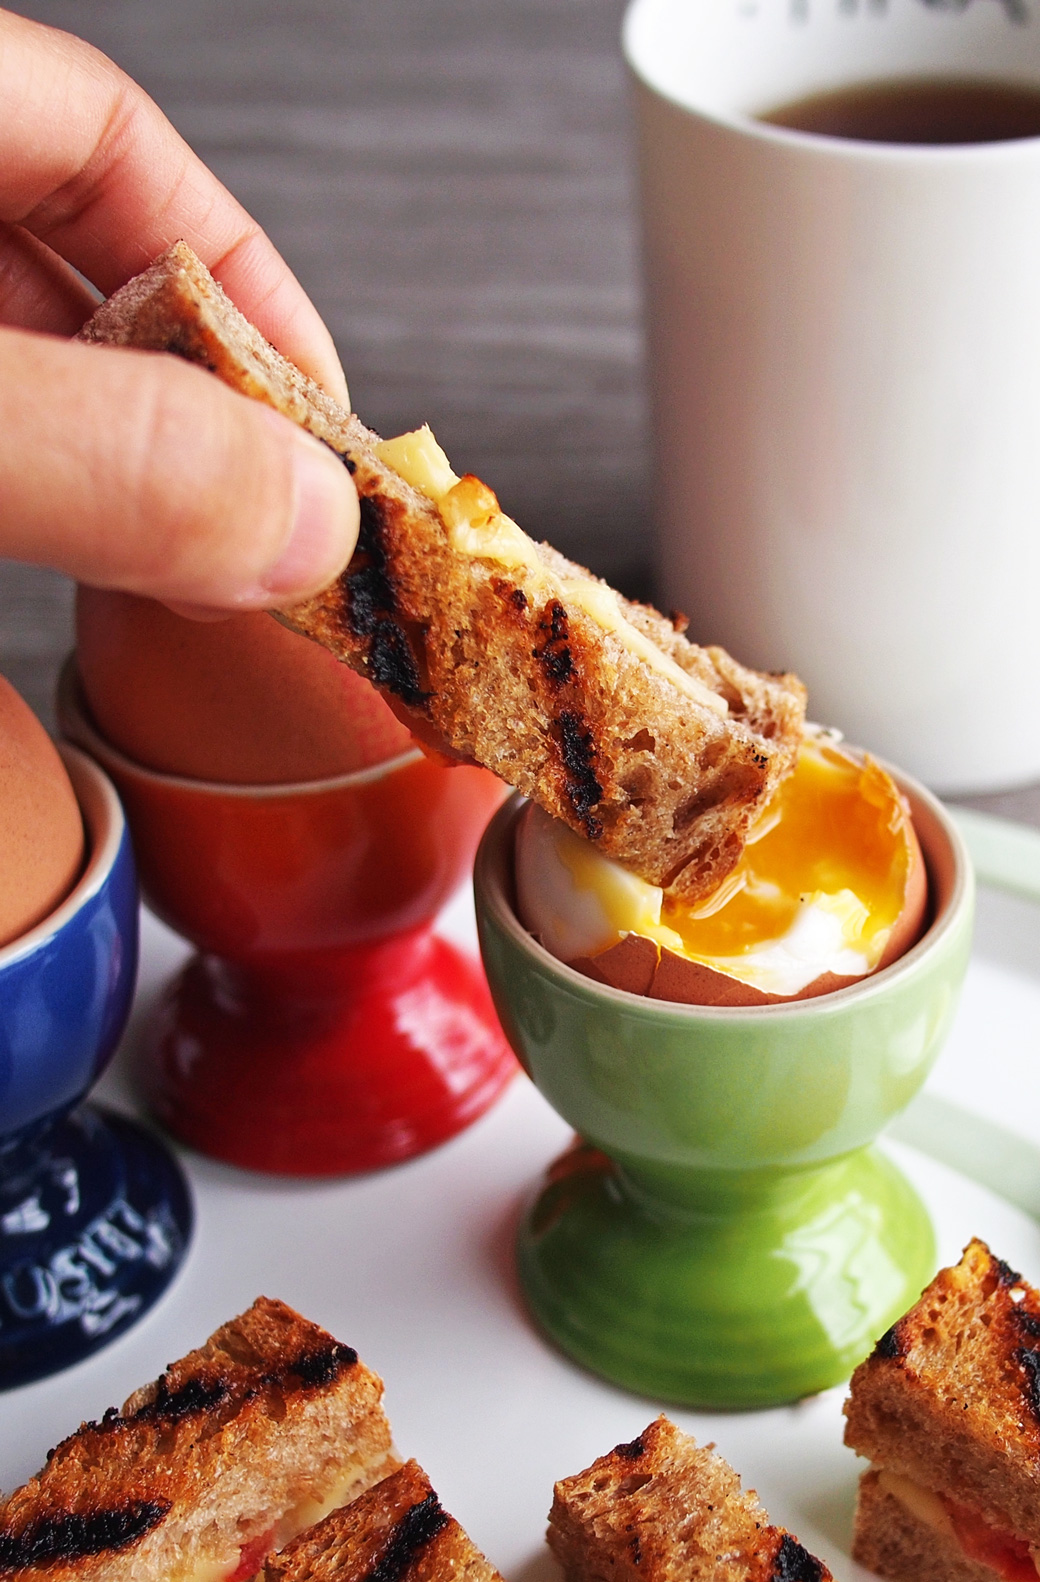 Dippy Eggs and Grilled Cheese